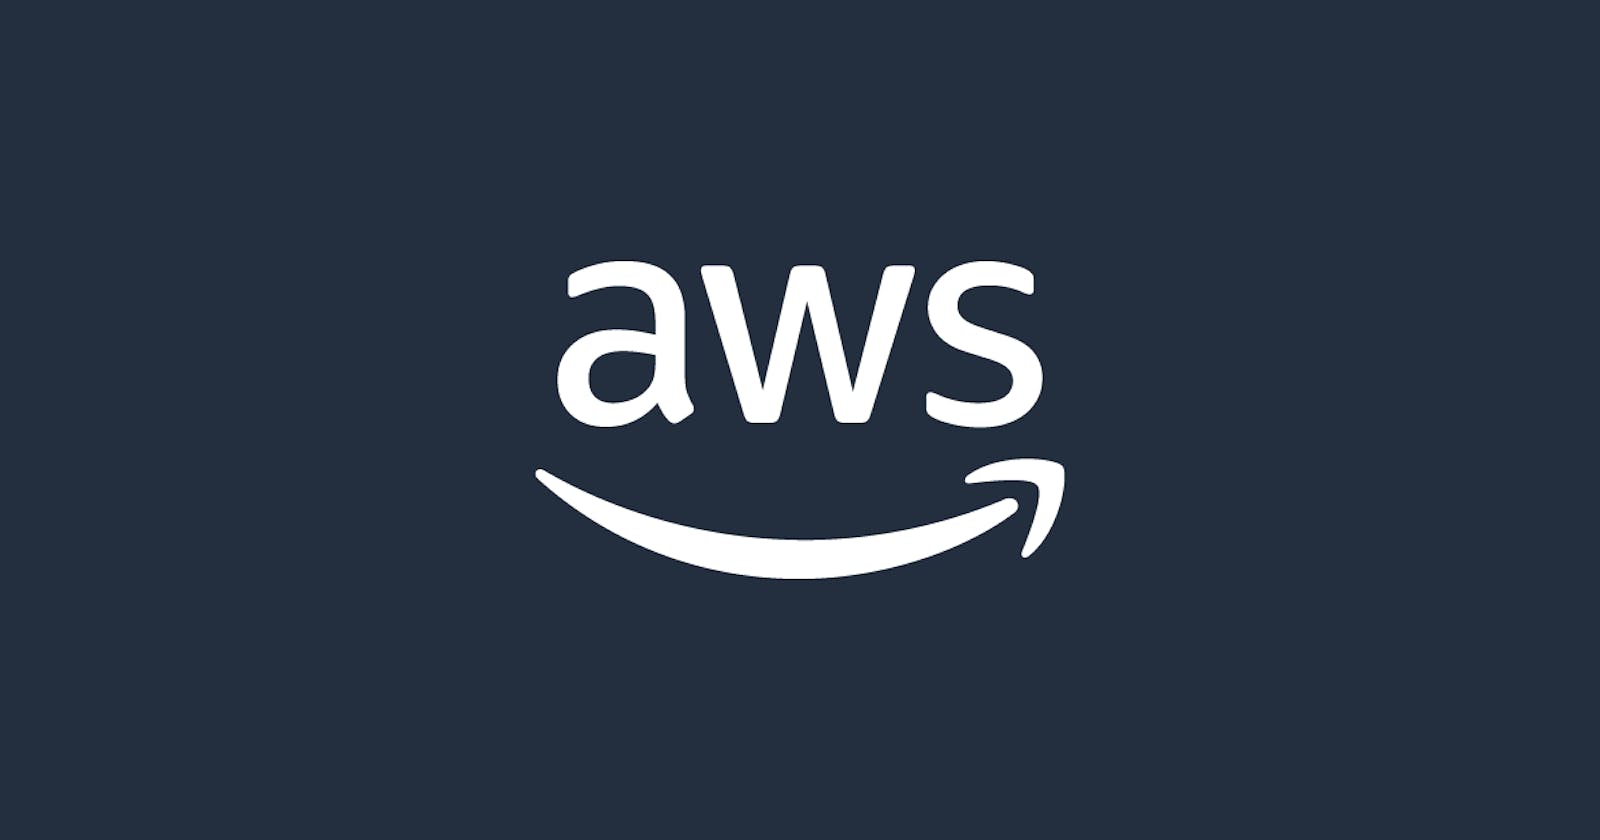 Automated project using the capabilities of AWS services such as EC2, Lambda, API Gateway, and SSM